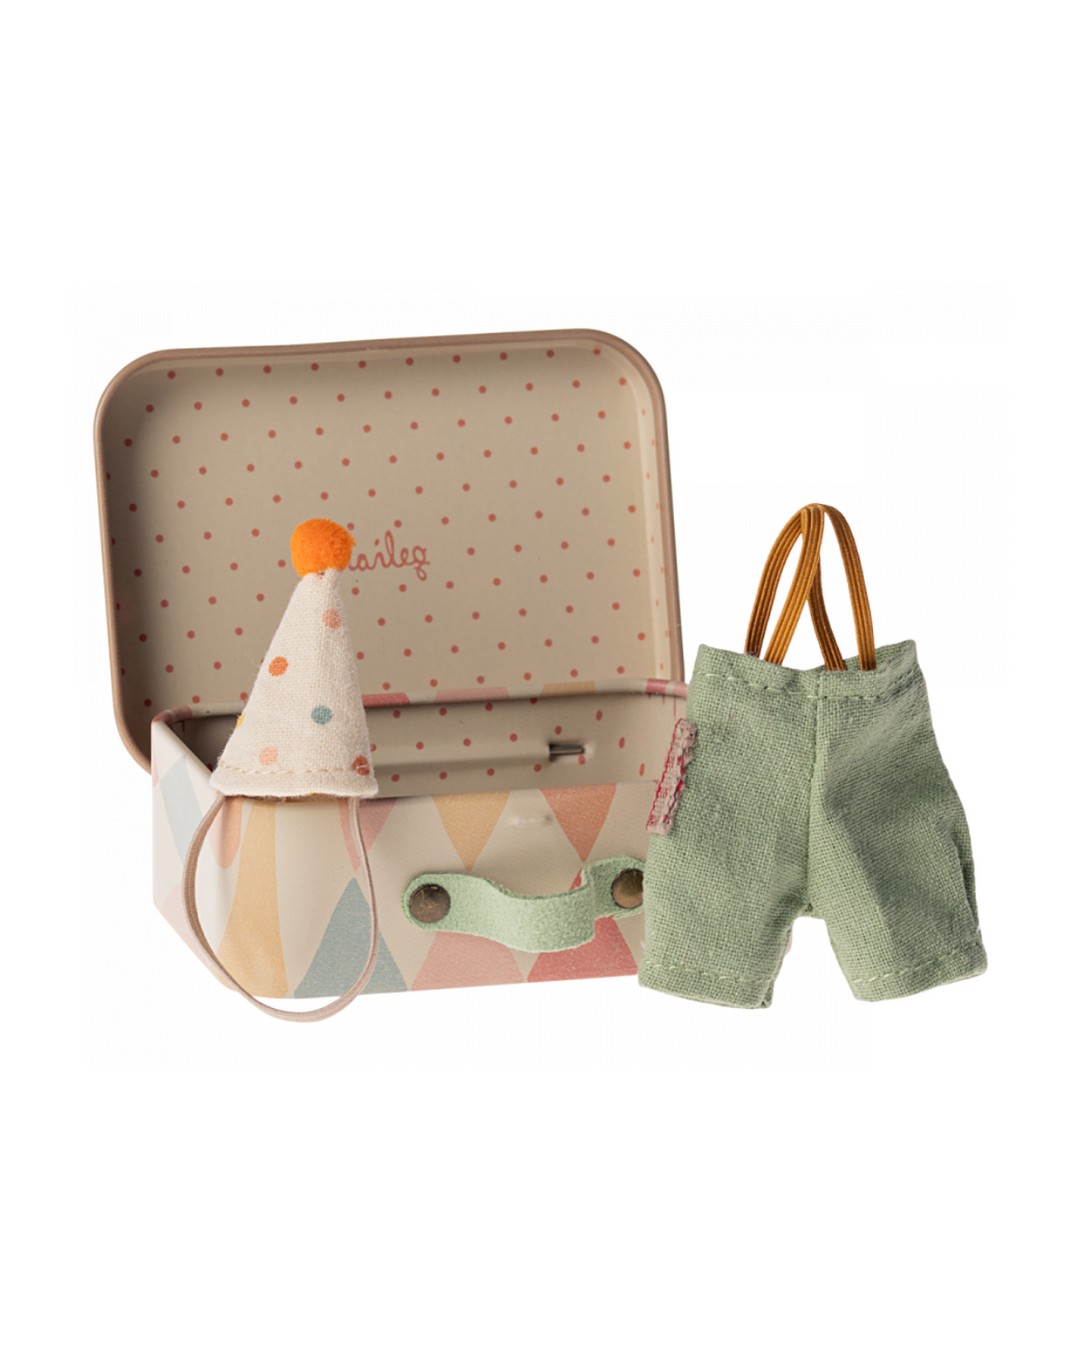 Maileg Little Brother Clown Clothes Set in Suitcase - Delightful dress-up set in a handy suitcase